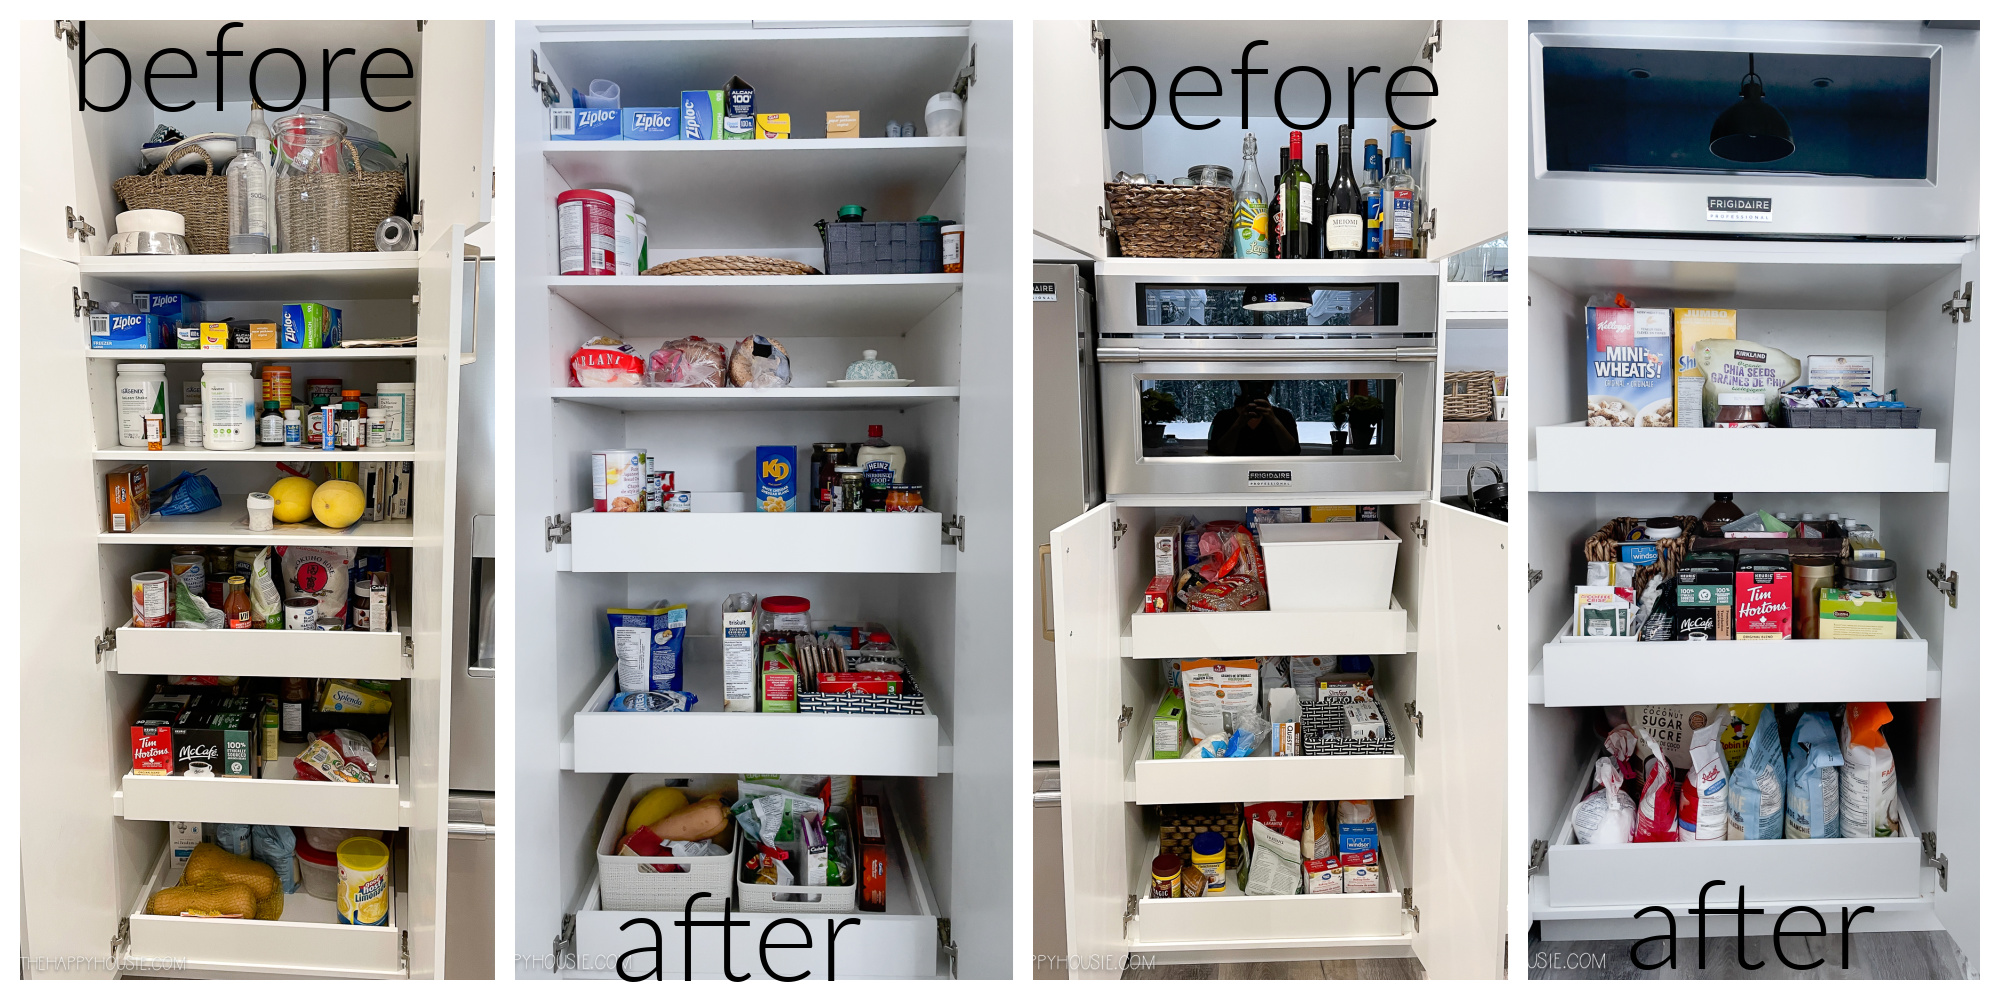 Before and after photos of an organized pantry.